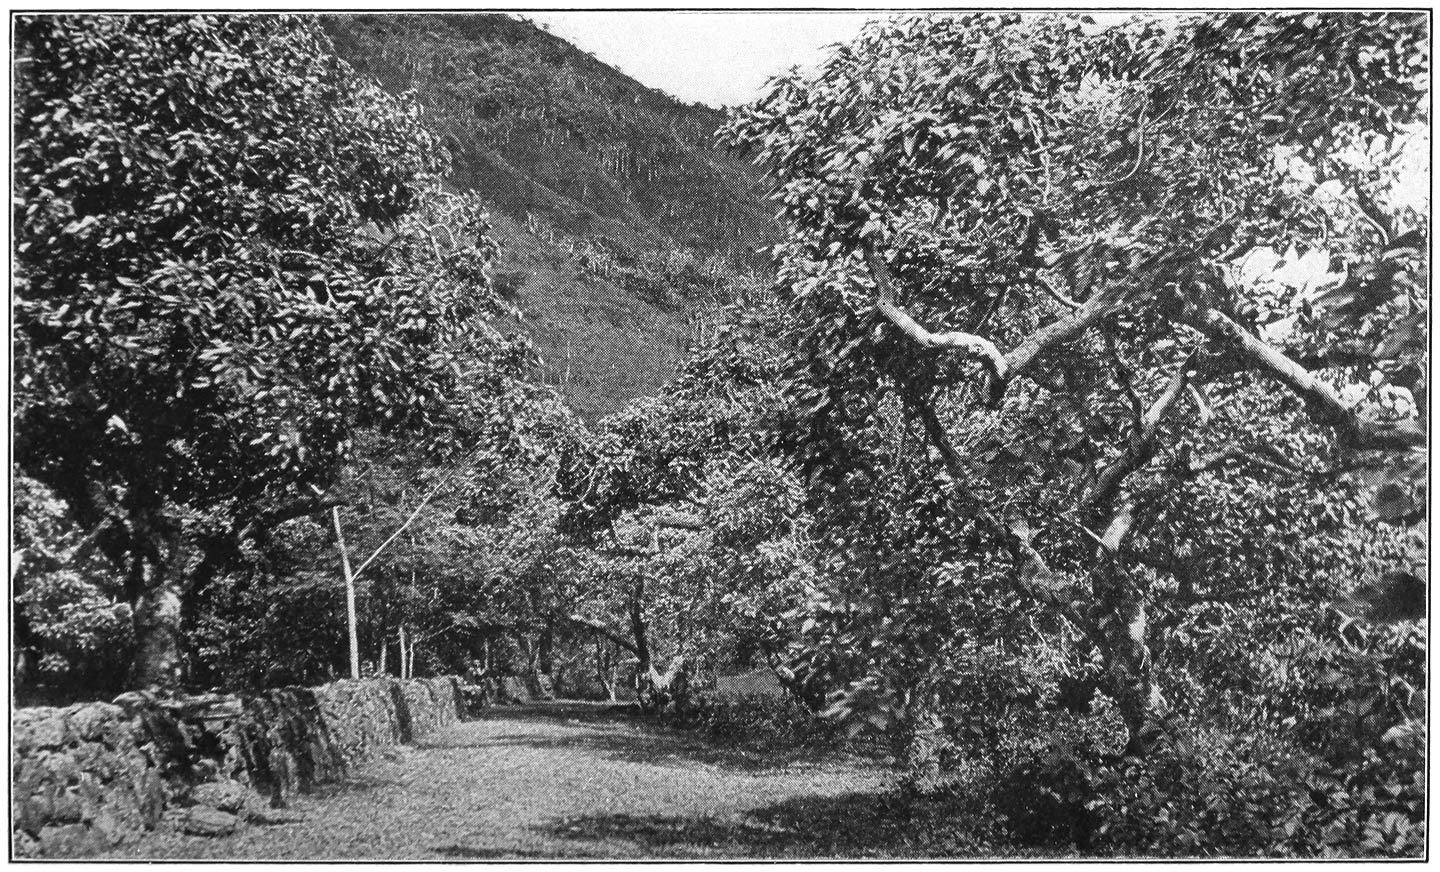 KUKUI, OR CANDLE NUT, TREES